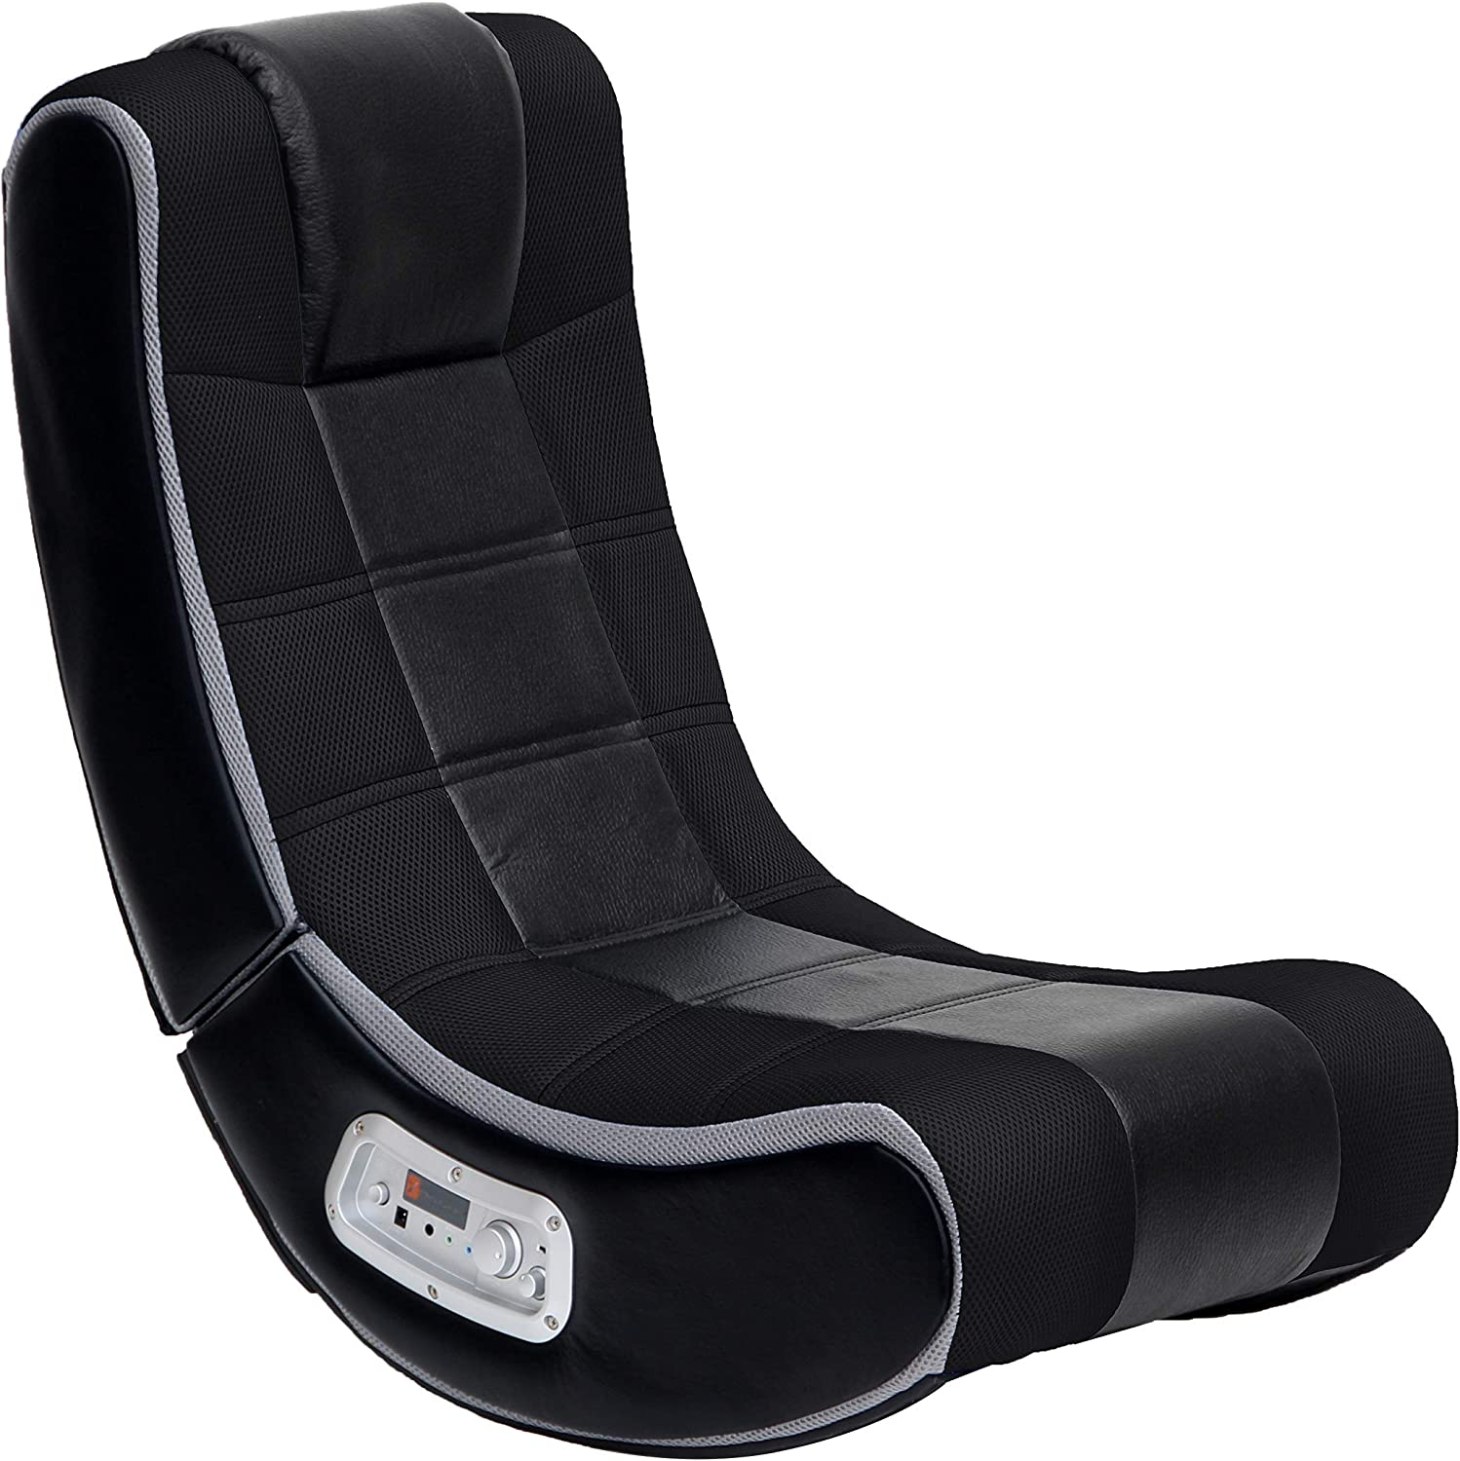 a black rocking gaming chair, one of the best gifts for teen boys